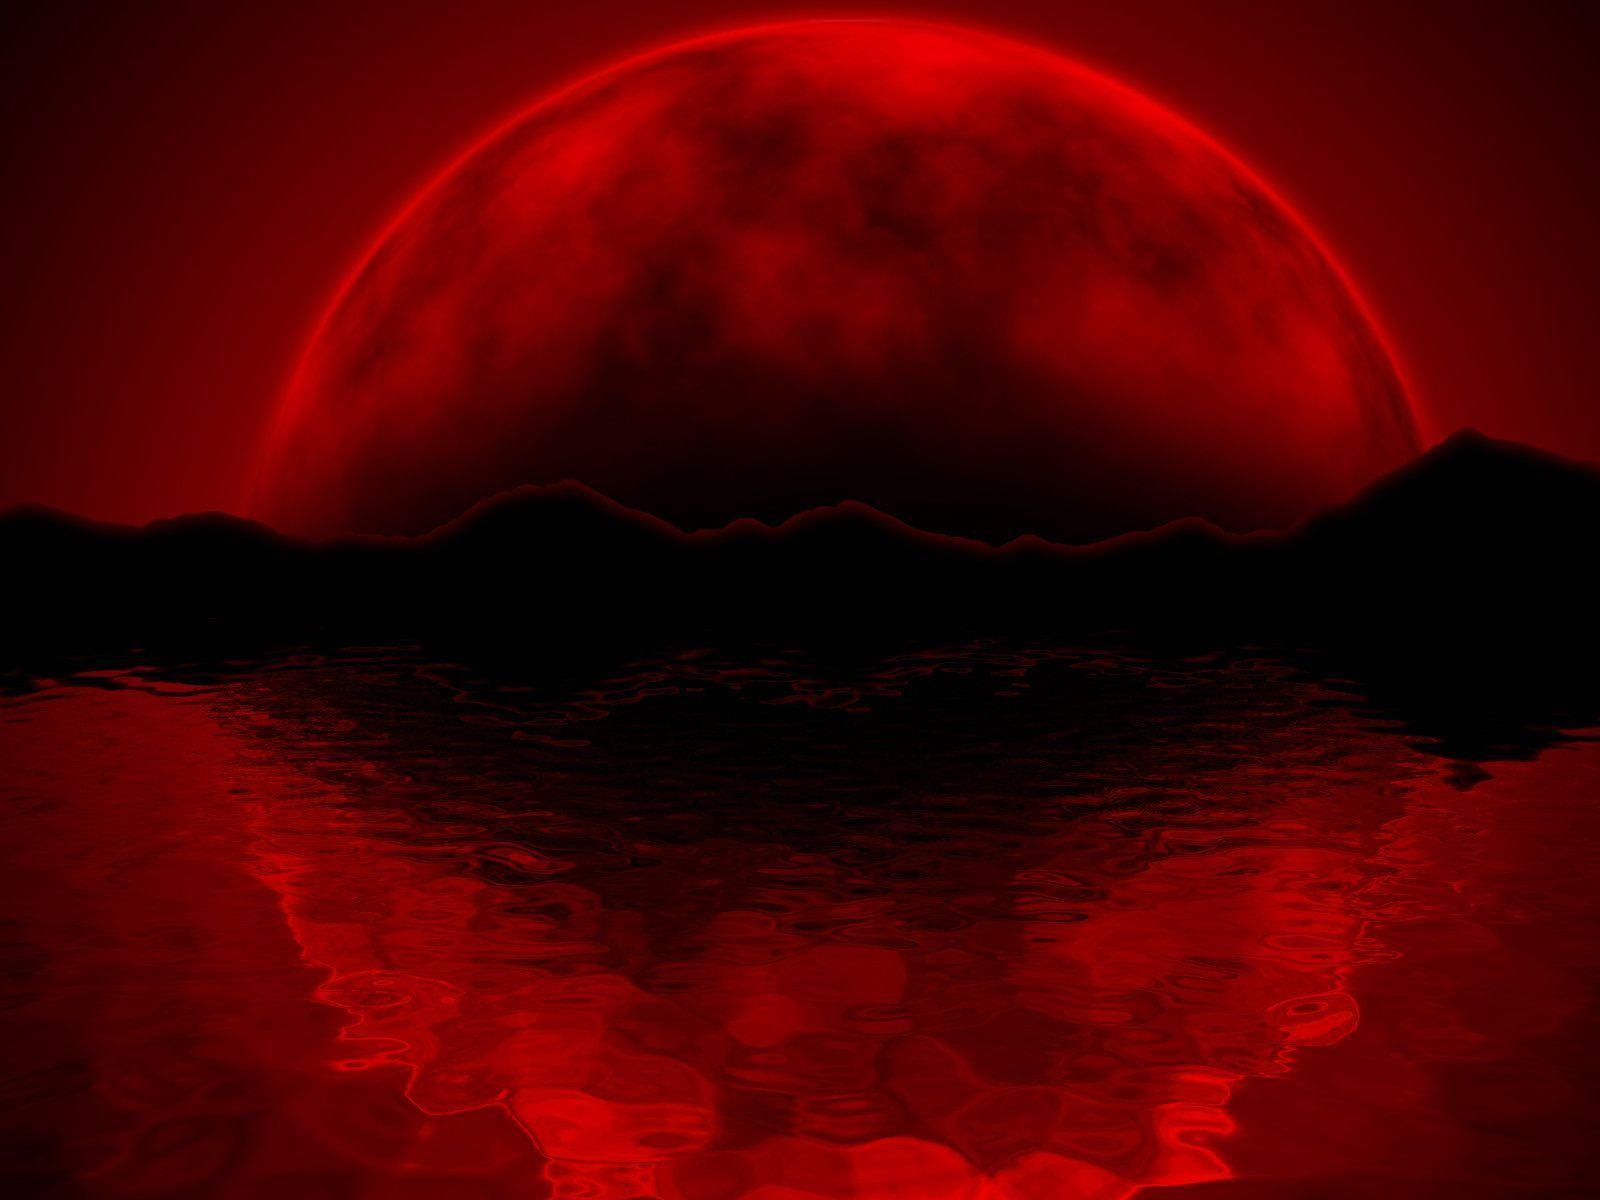 A red moon is reflected in a body of water - Crimson